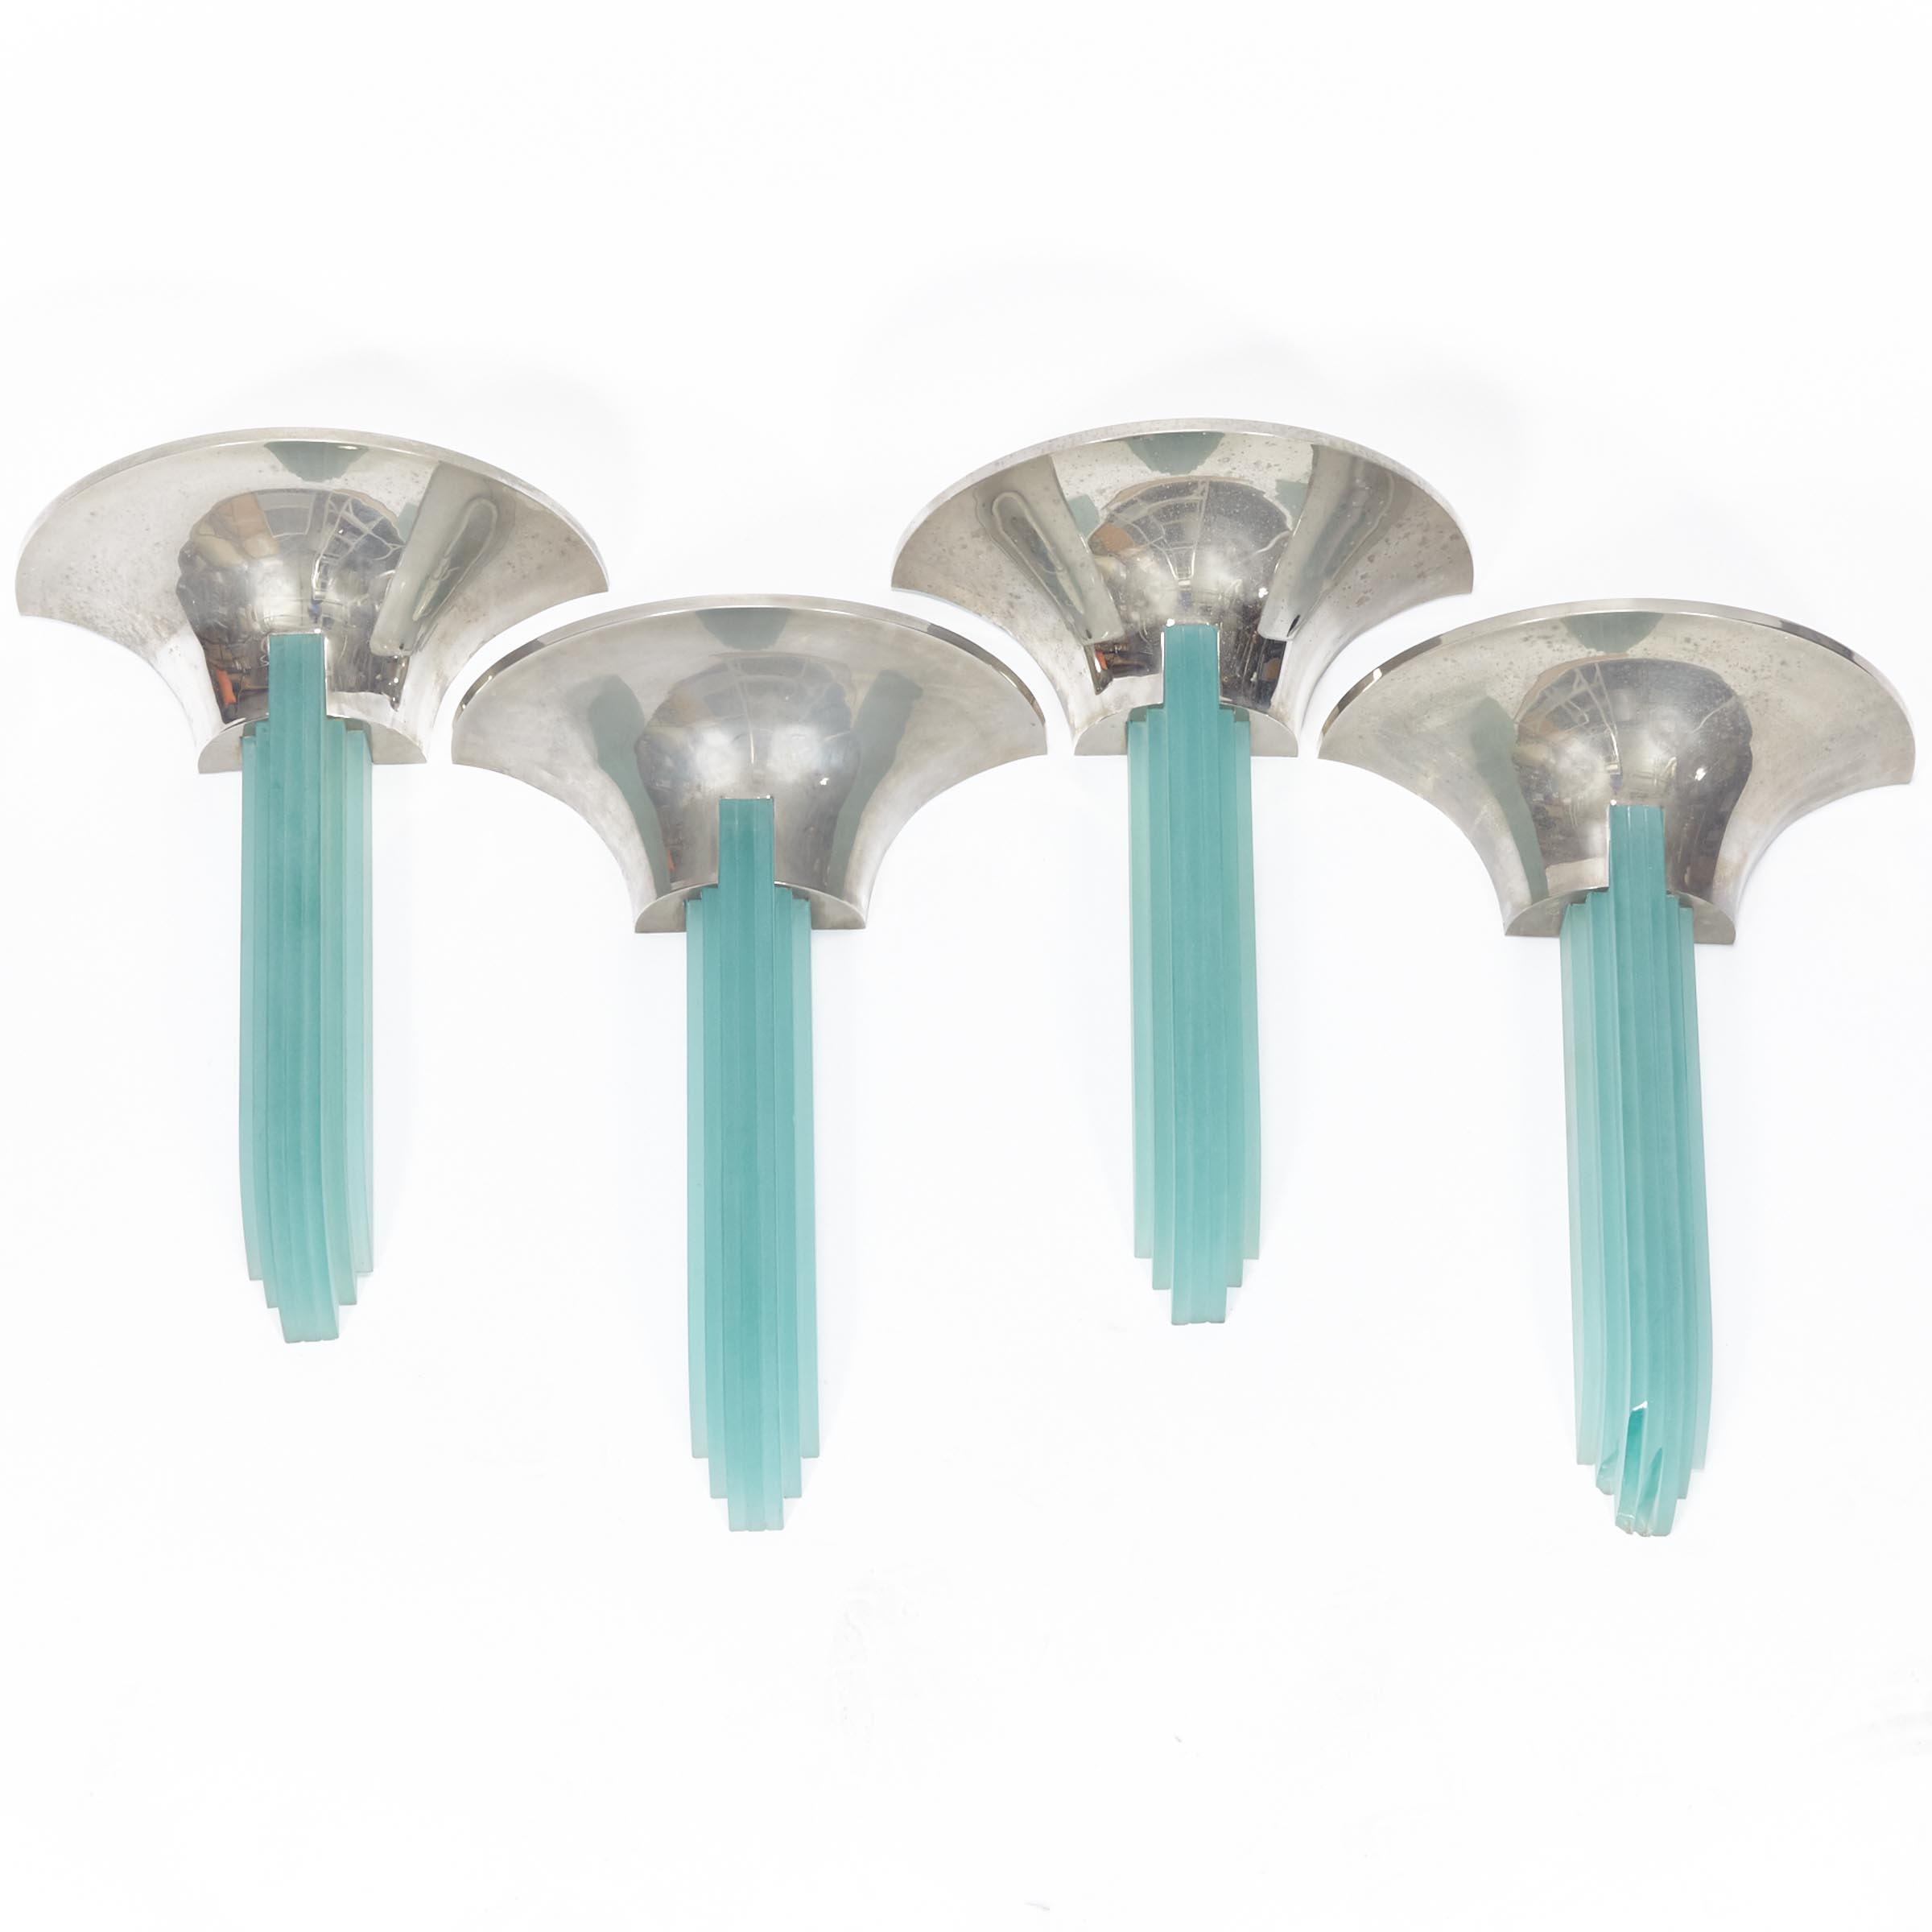 Set of Four Jean Perzel (French, 1885-1996) Art Deco Wall Sconces, 2nd half, 20th century